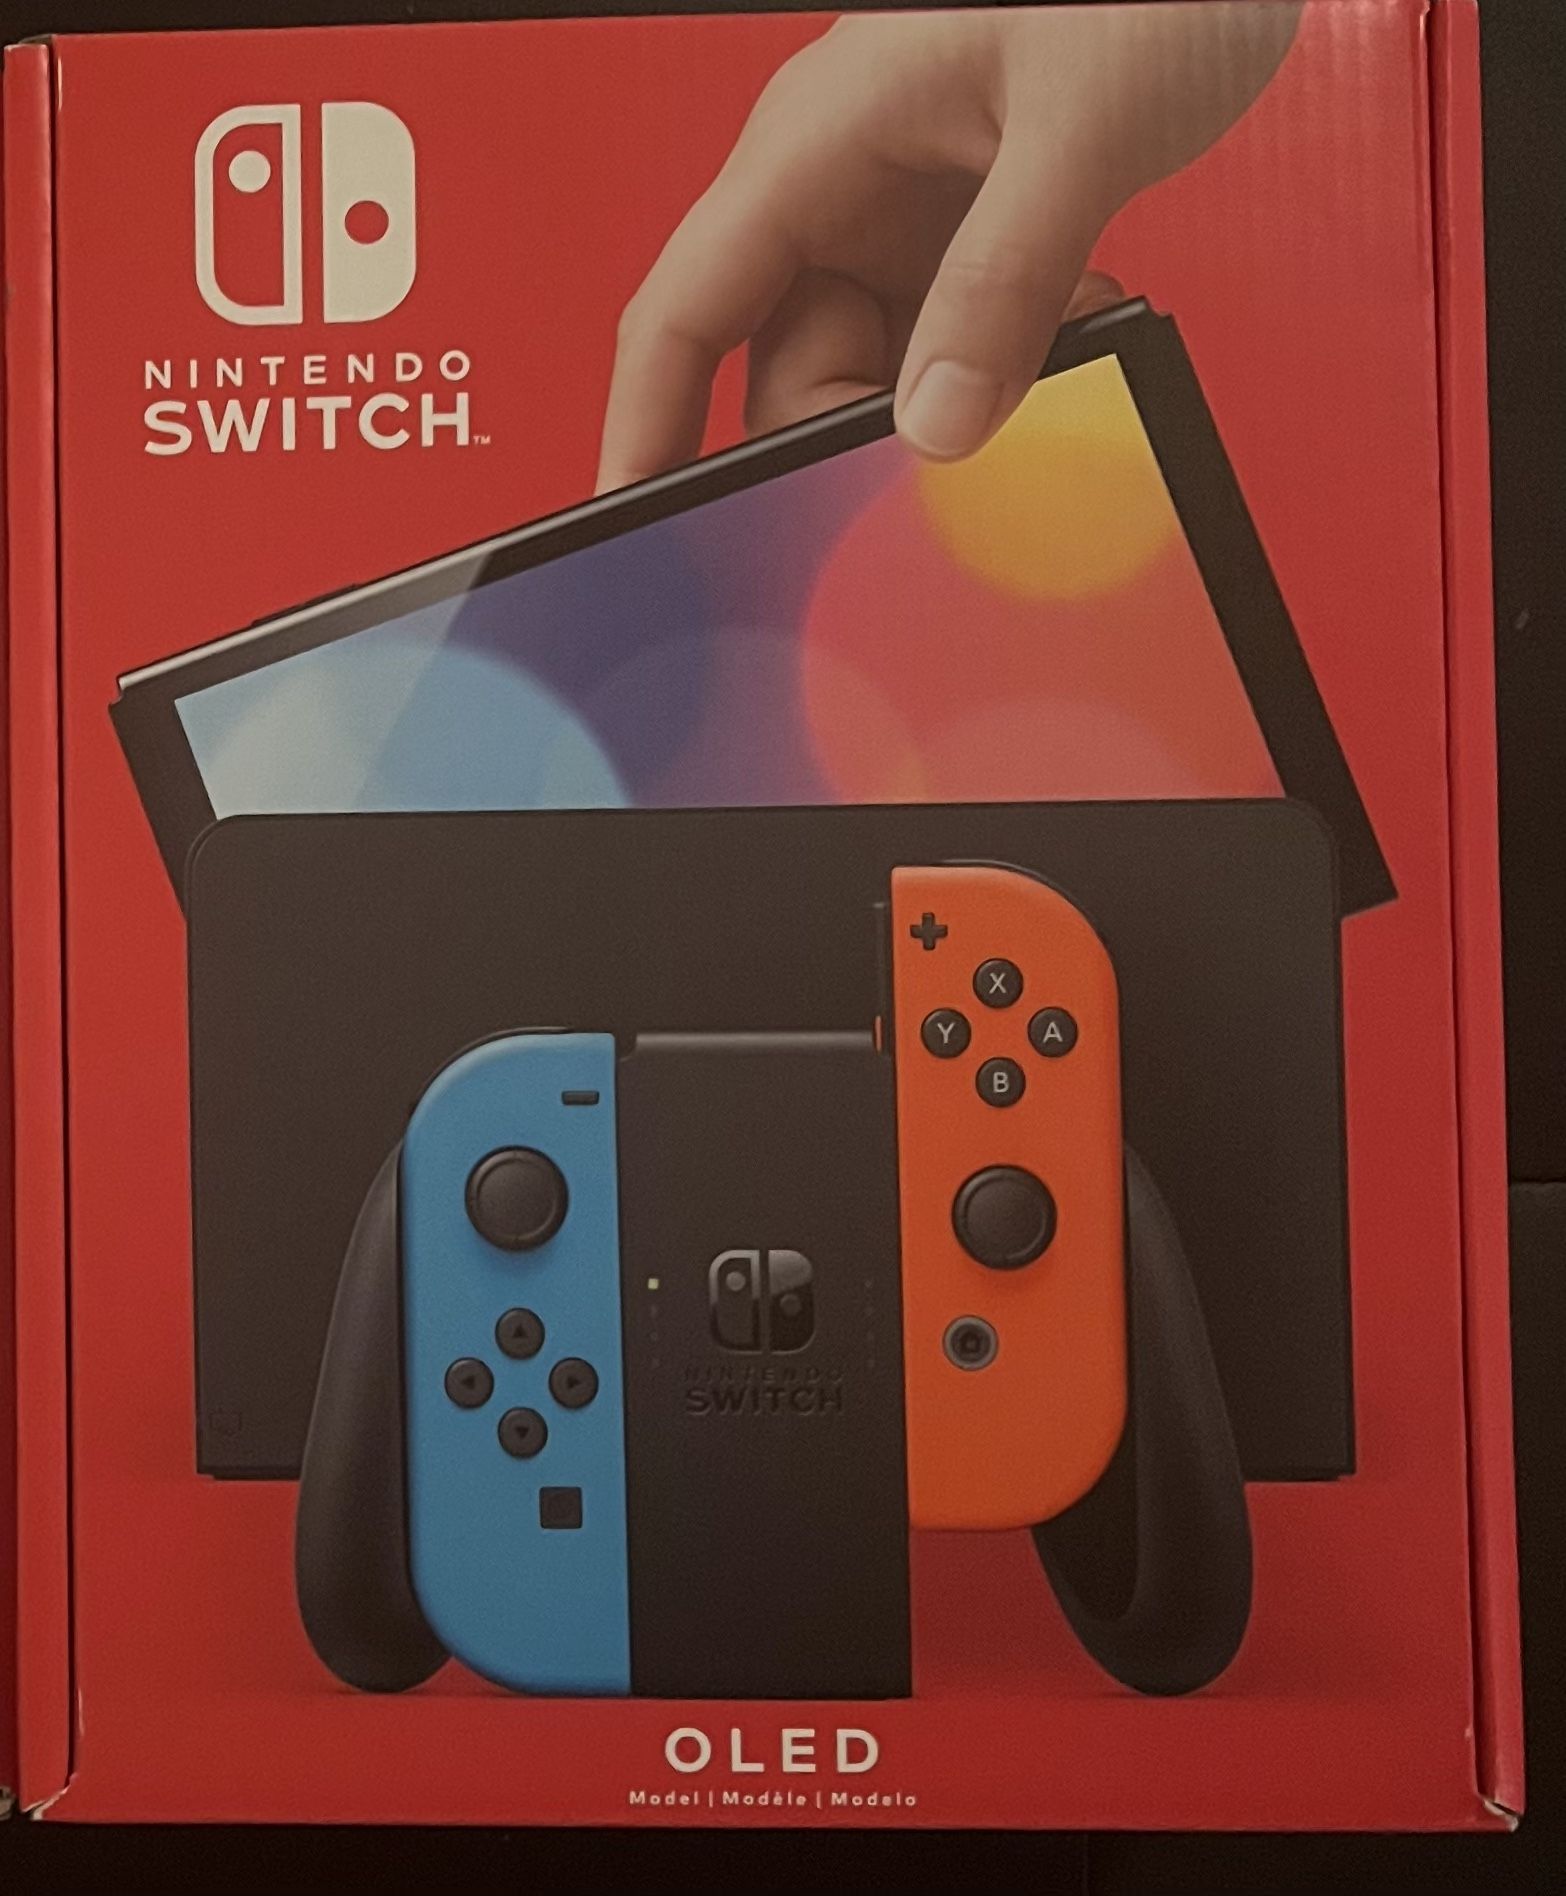 Nintendo Switch OLED (red/blue)